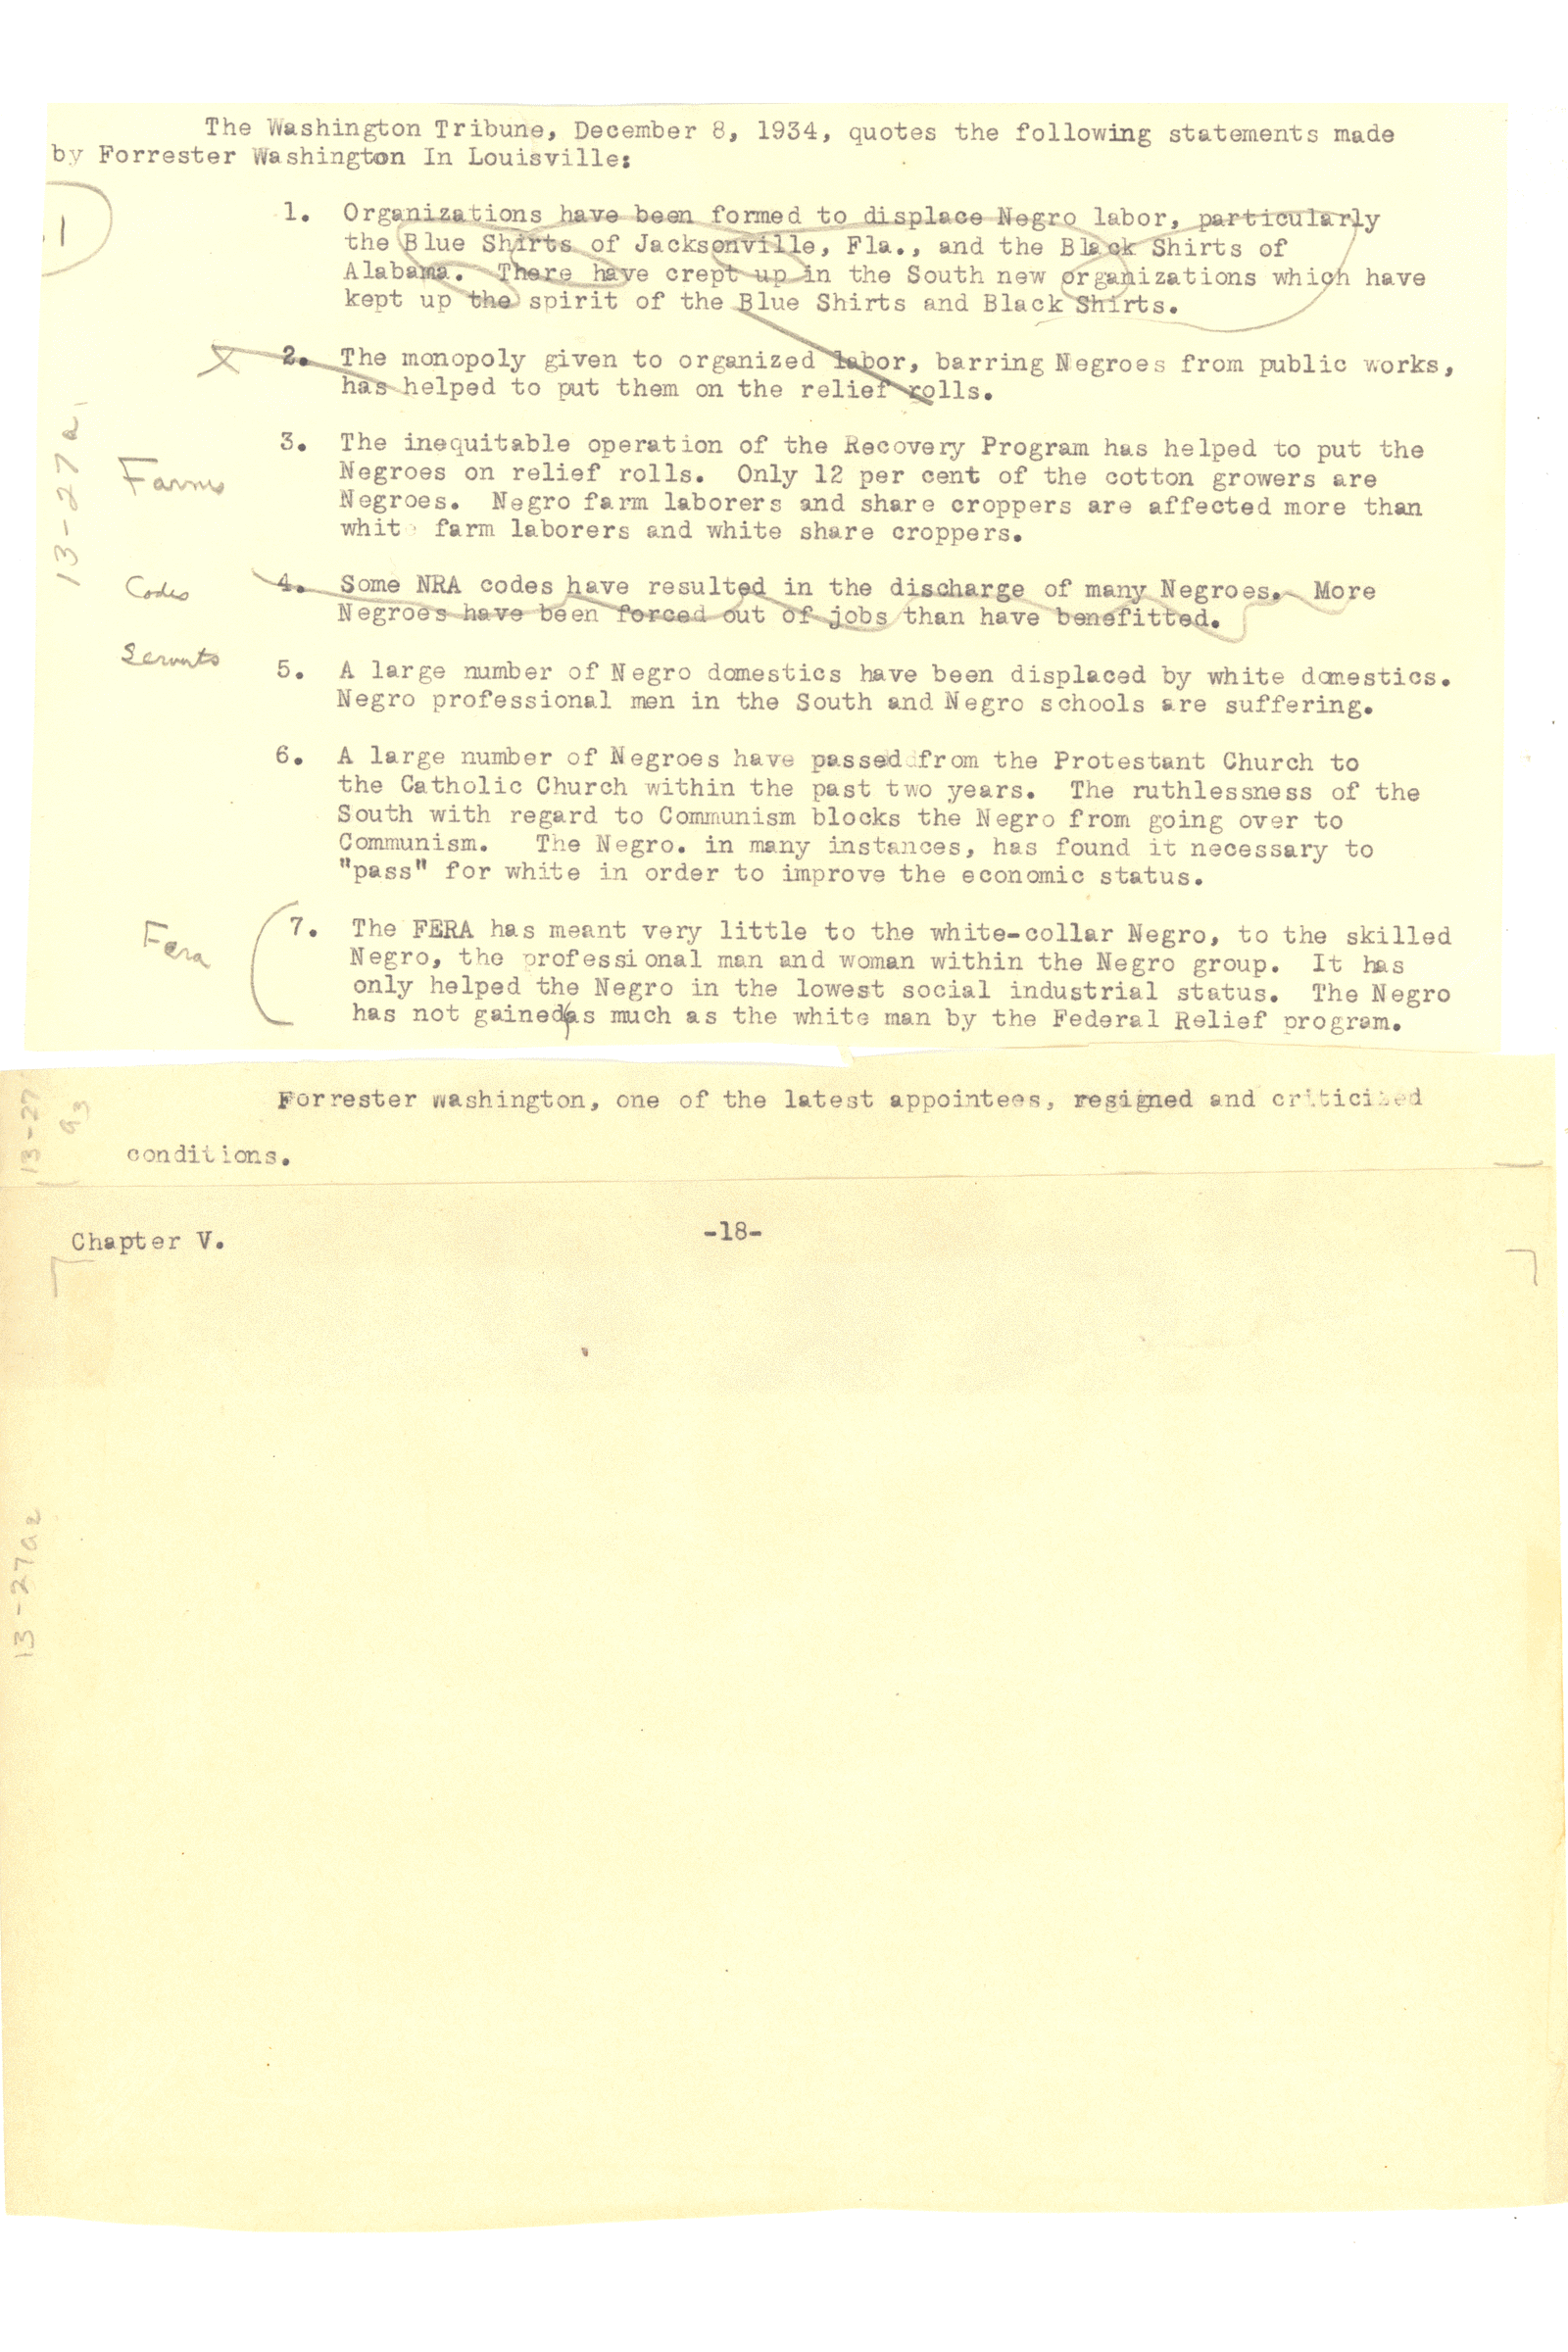 Image for transcribed quotes from forrester washington, ca 1934 w e b du bois papers (ms 312) special collections and university archives, university of massachusetts amherst libraries